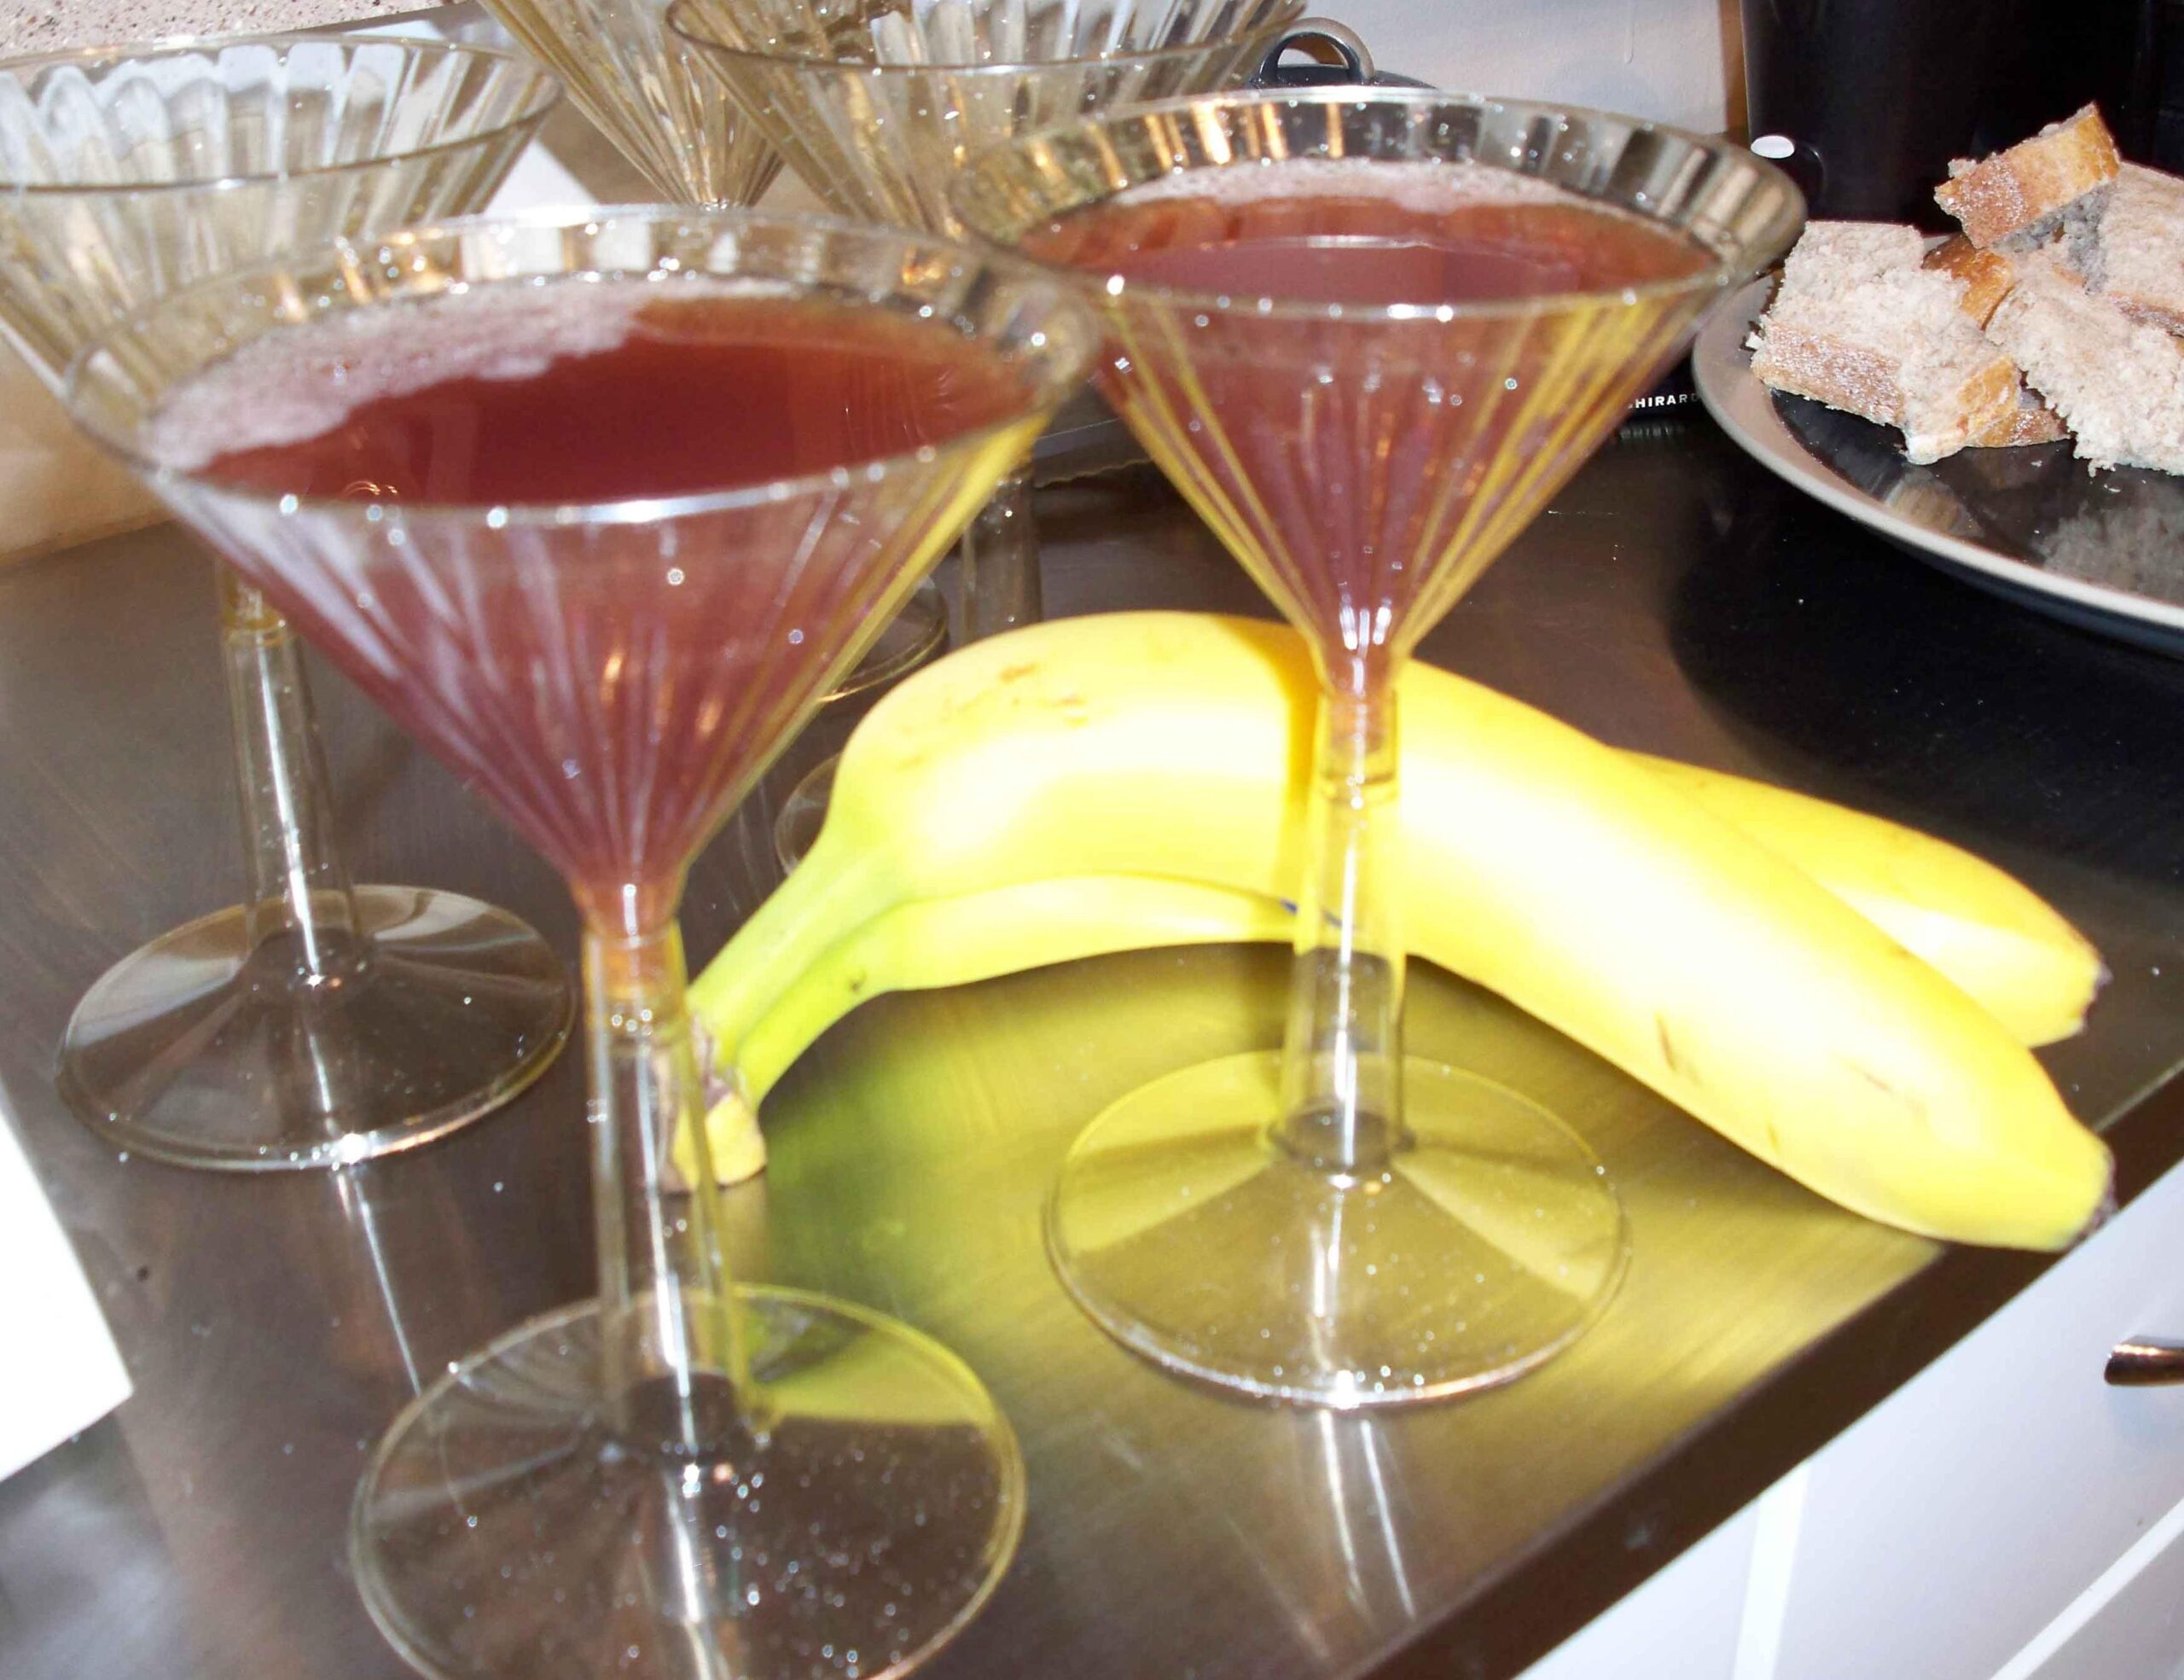 Impress Your Guests with this Mouth-Watering Cocktail Recipe